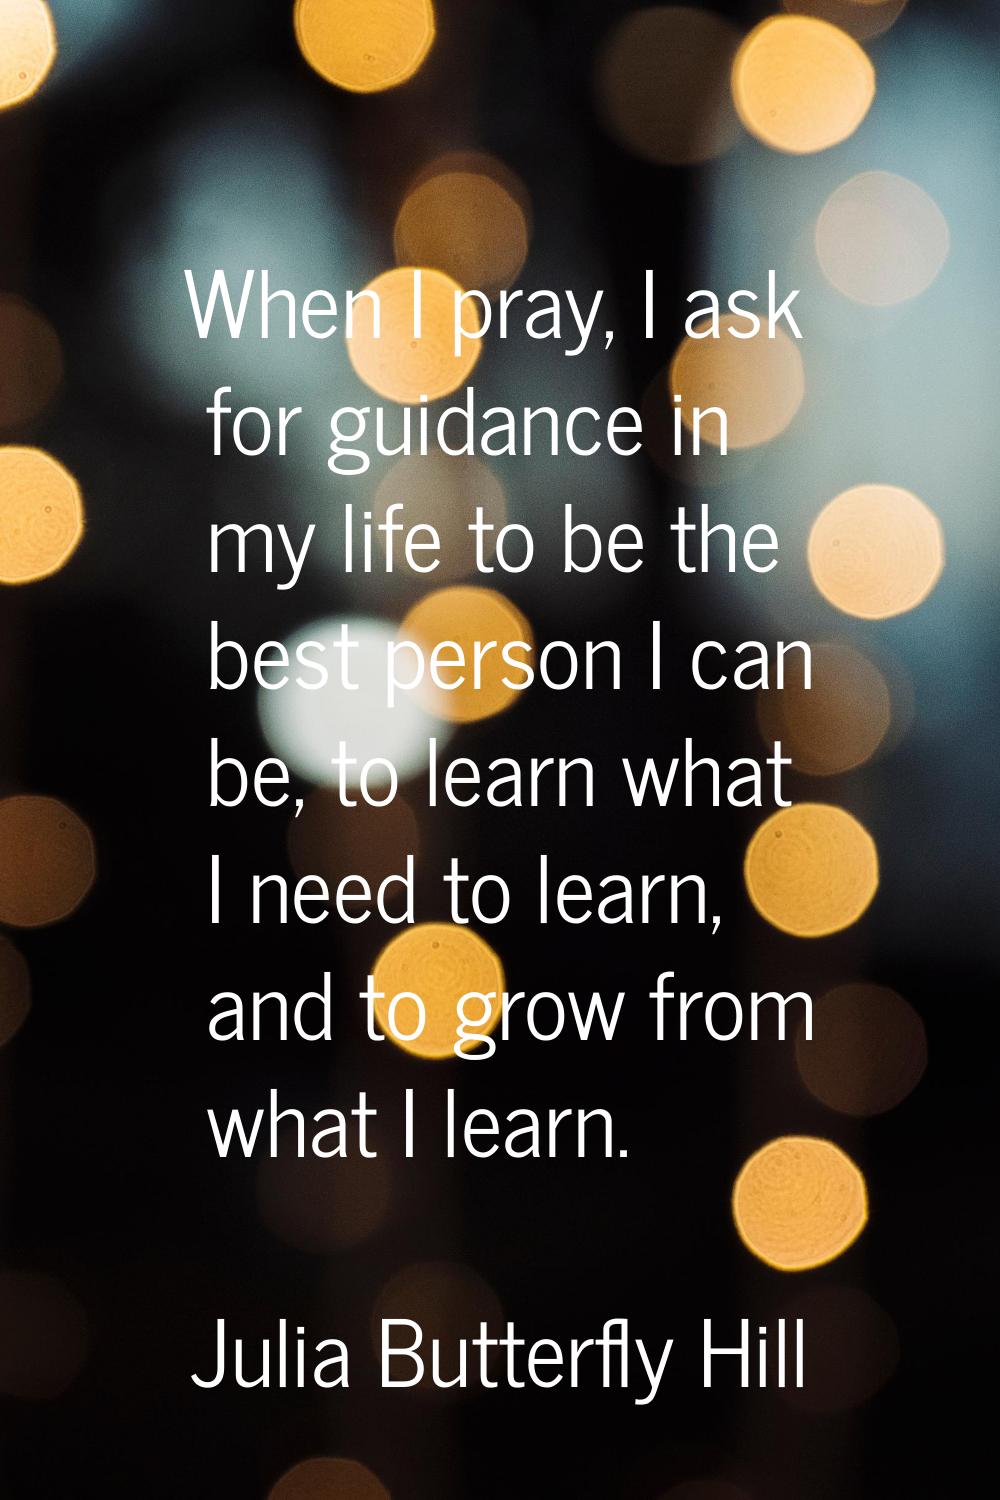 When I pray, I ask for guidance in my life to be the best person I can be, to learn what I need to 